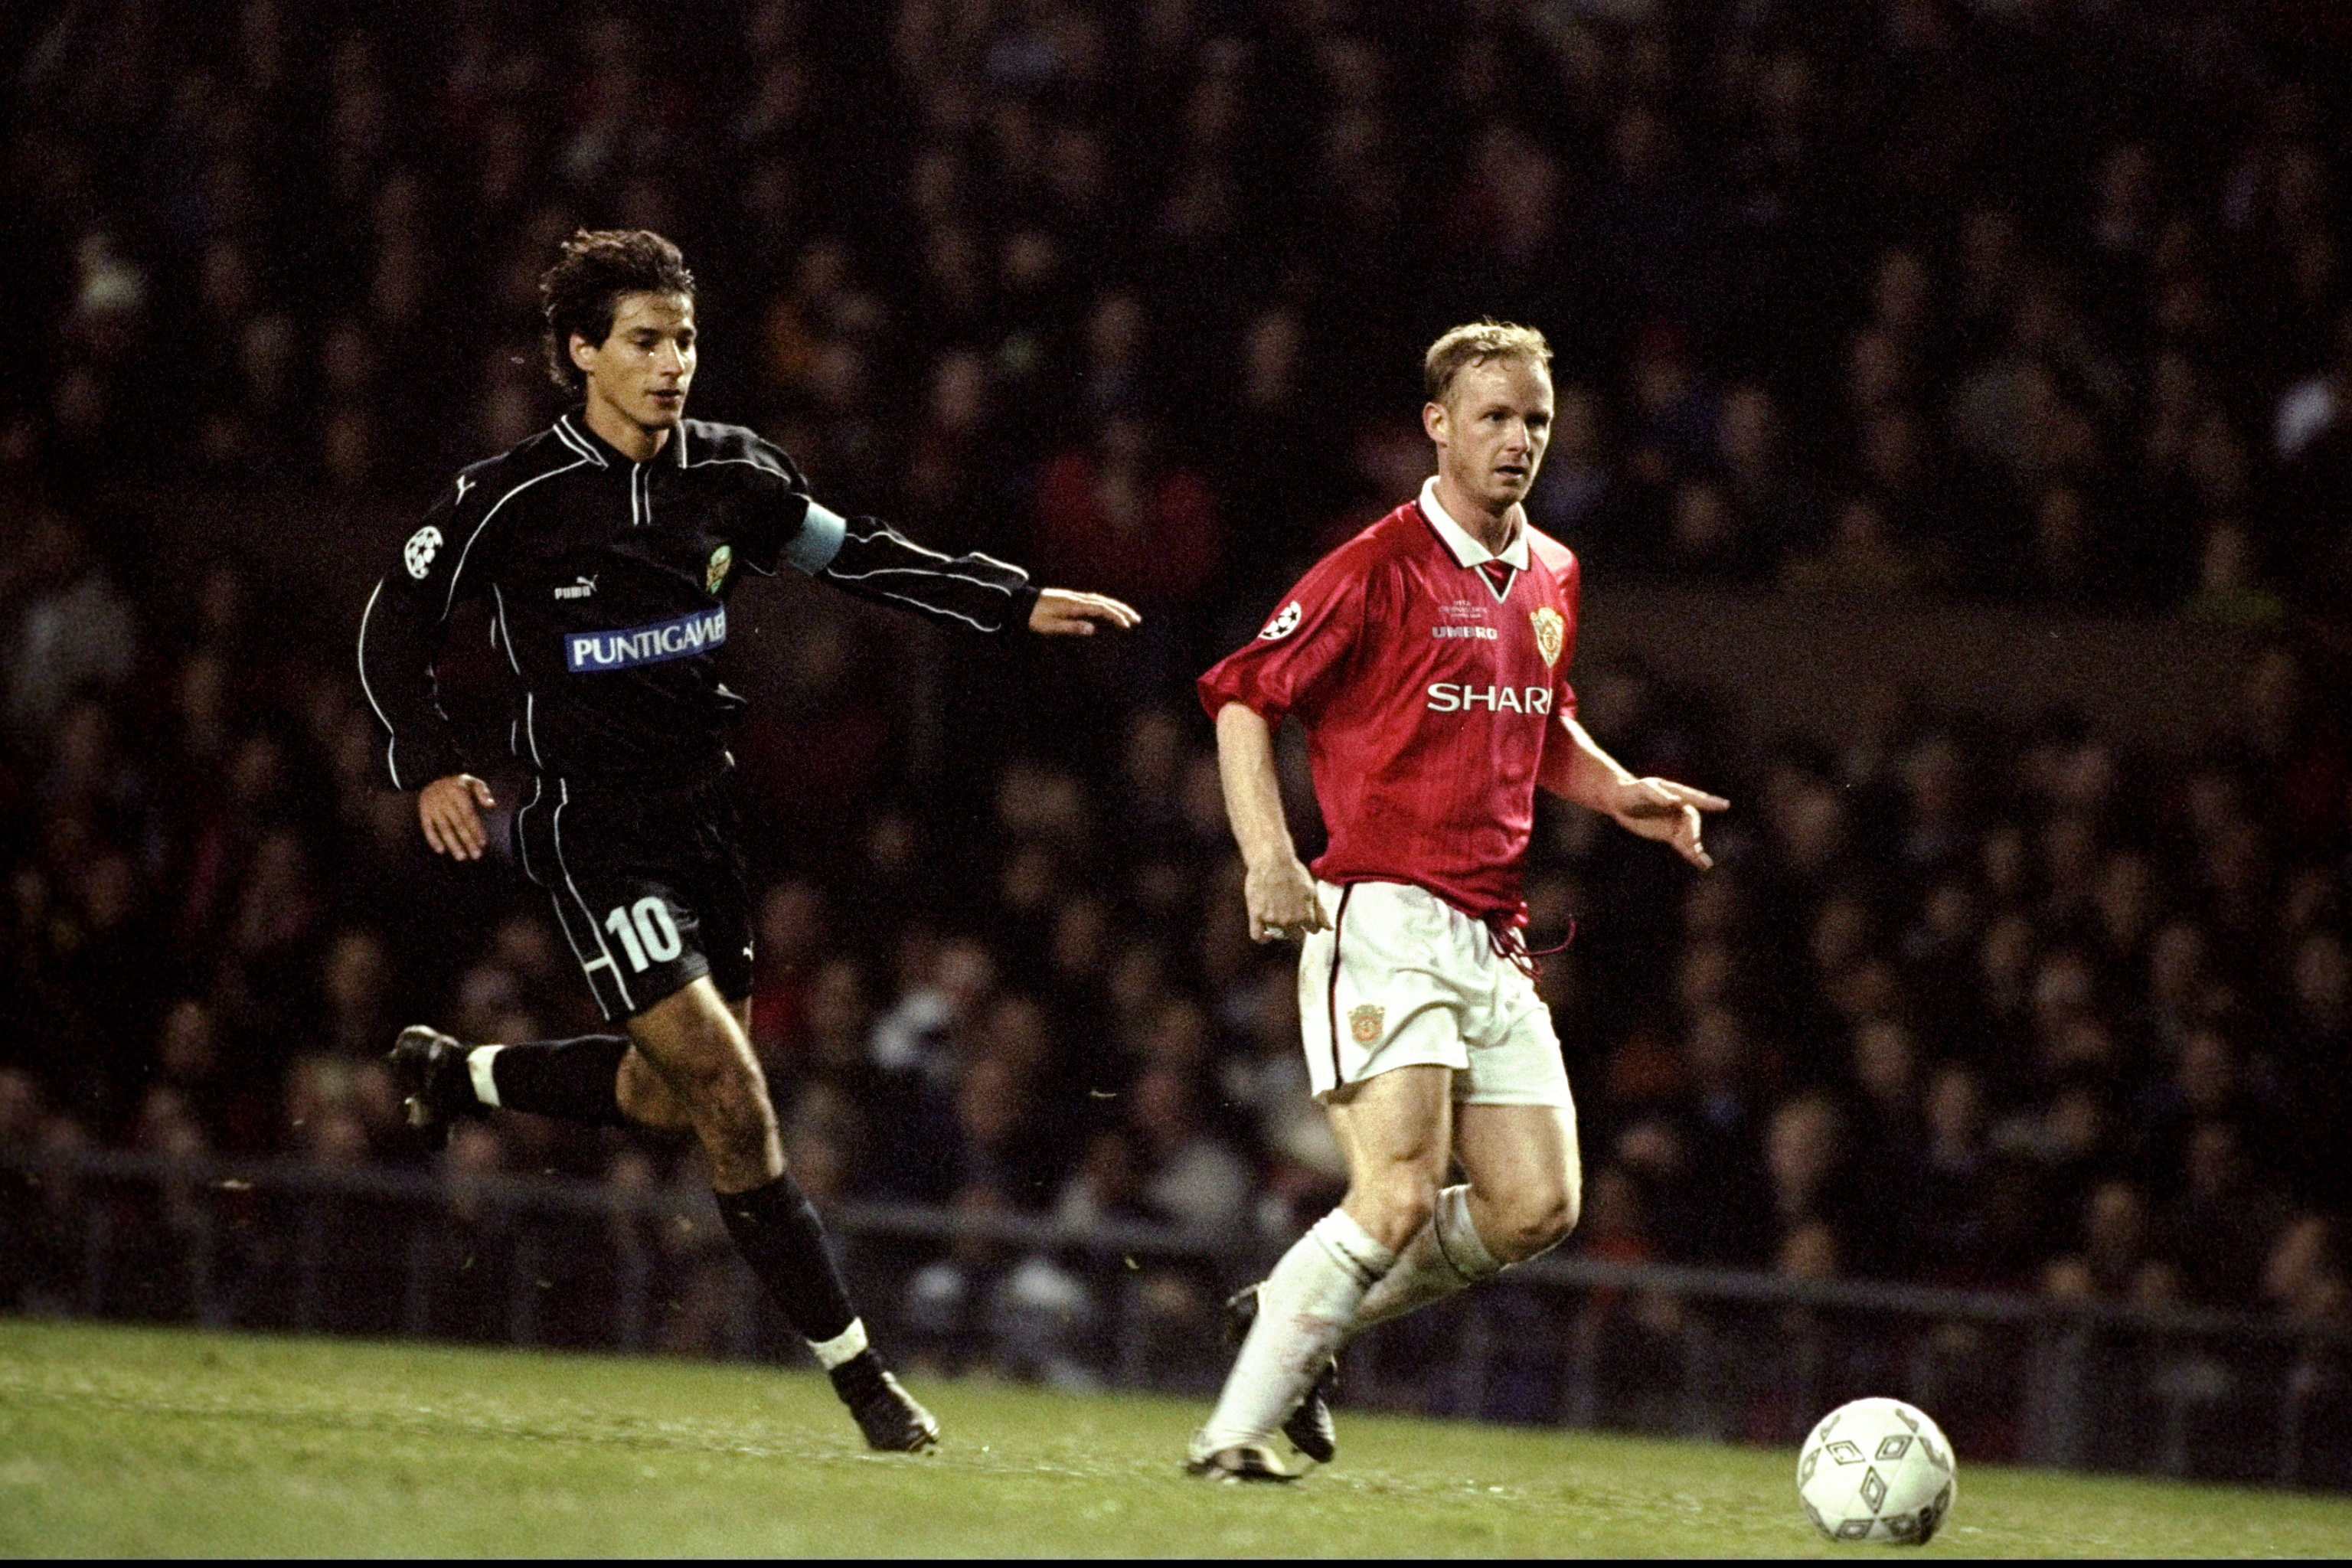 2 Nov 1999:  David May of Manchester United and Ivica Vastic of Sturm Graz in action during the UEFA Champions League Group D Match at Old Trafford in Manchester, England. Manchester United won 2-1 to top the group. \ Mandatory Credit: Ross Kinnaird /Alls